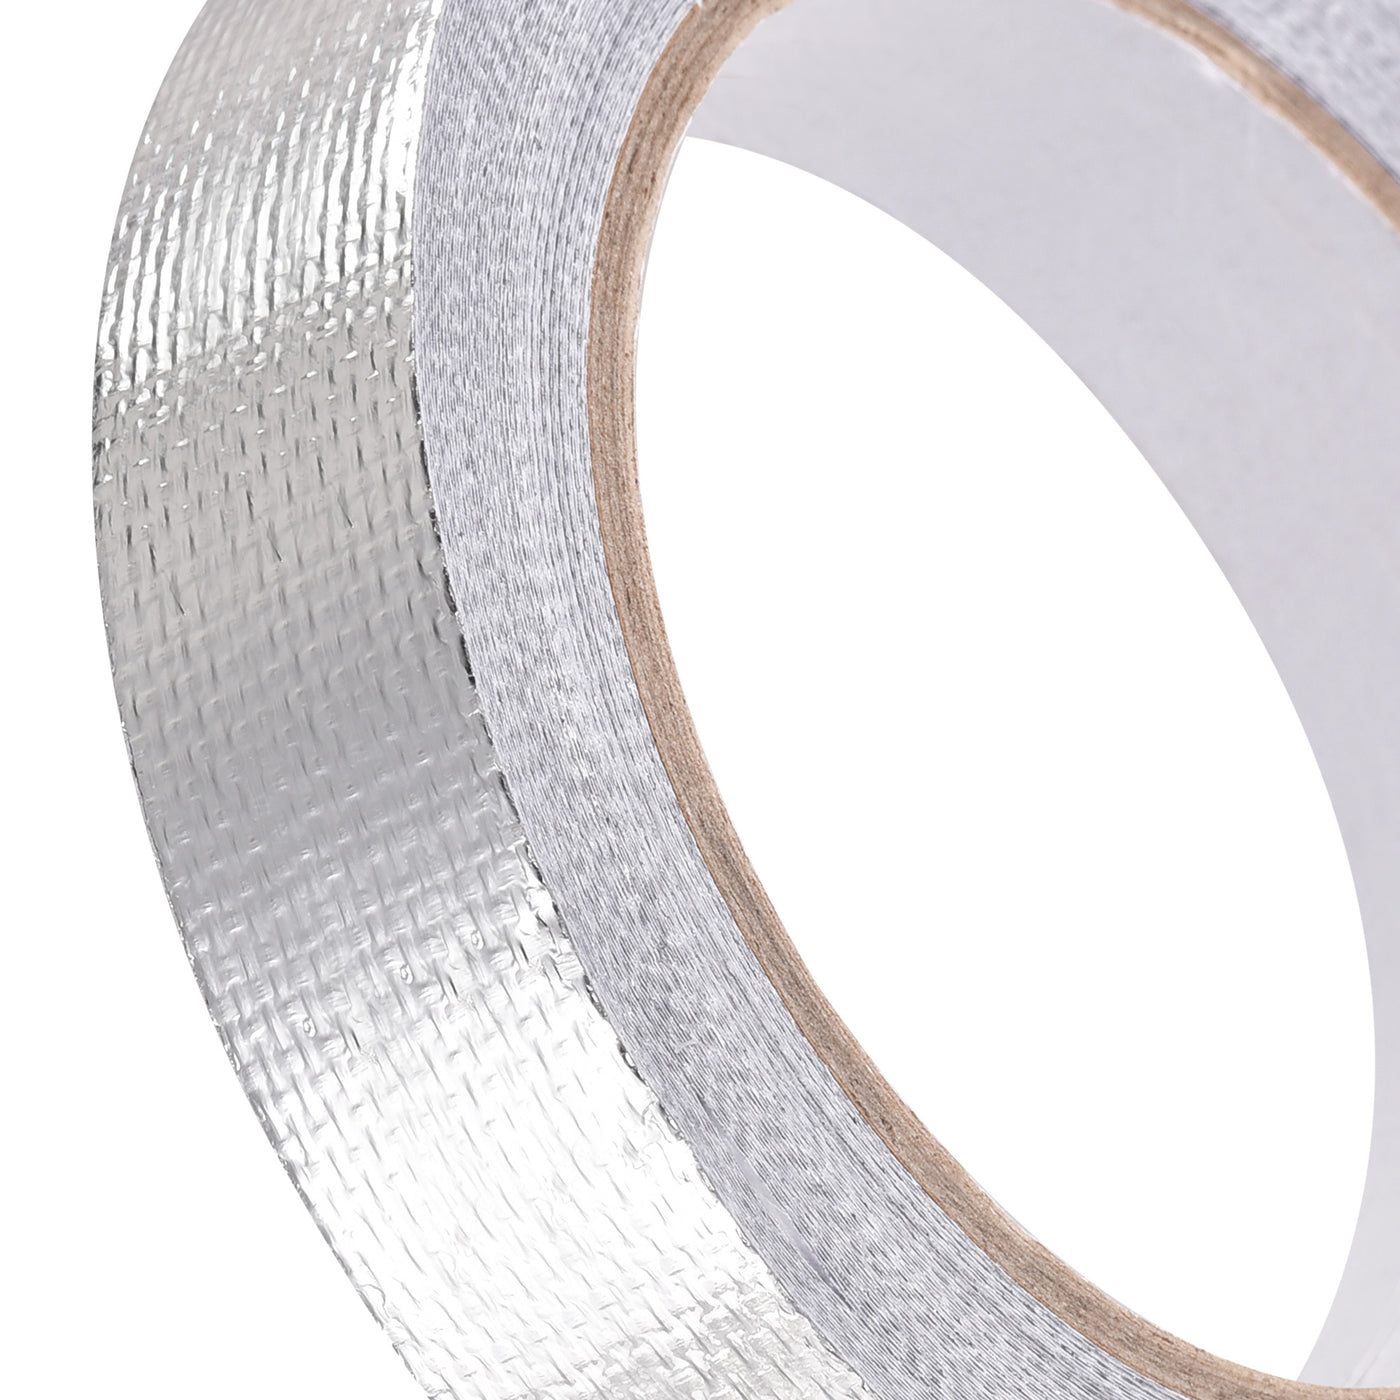 uxcell Uxcell Aluminum Foil Tape High-Temperature Tape for HVAC,Sealing 25mmx20m/65ft